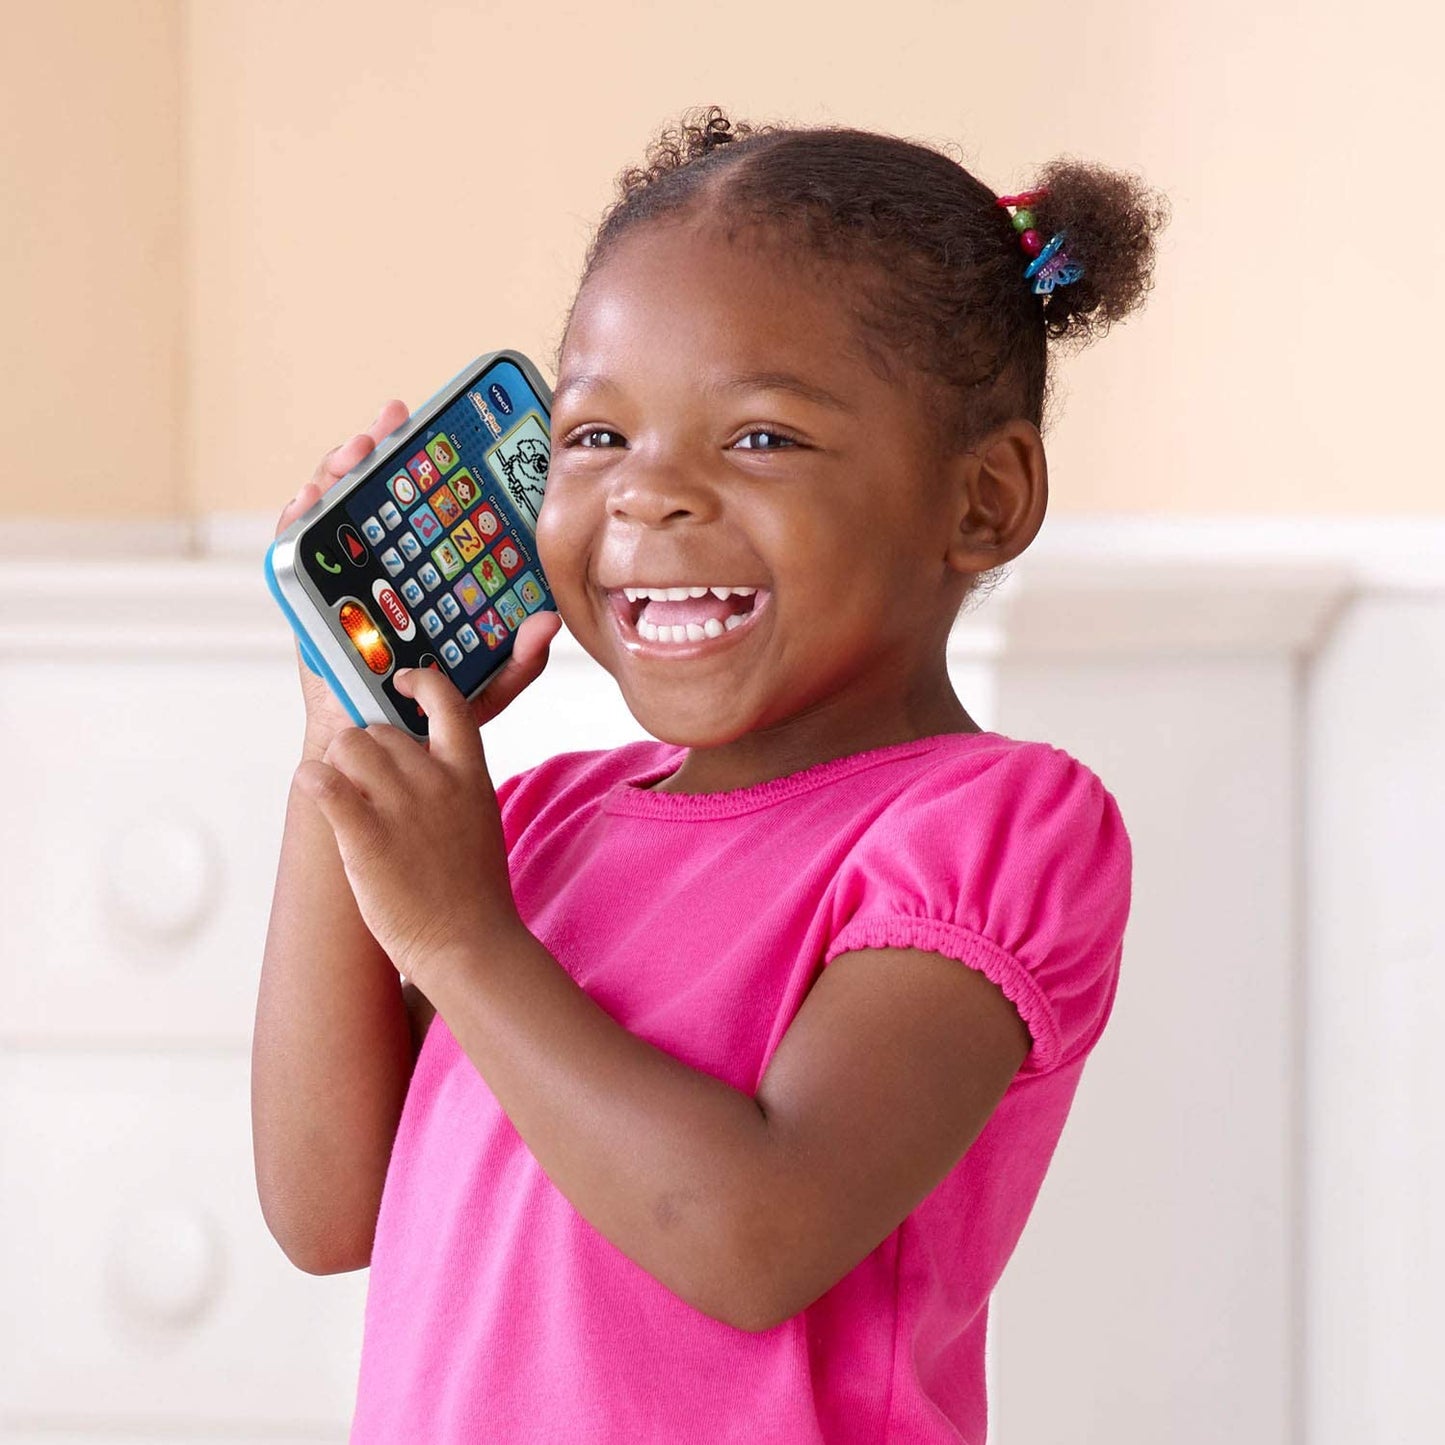 VTech Call and Chat Learning Phone - Kids Smart Phone Features 10 Realistic Phone Apps-Random Color Pick